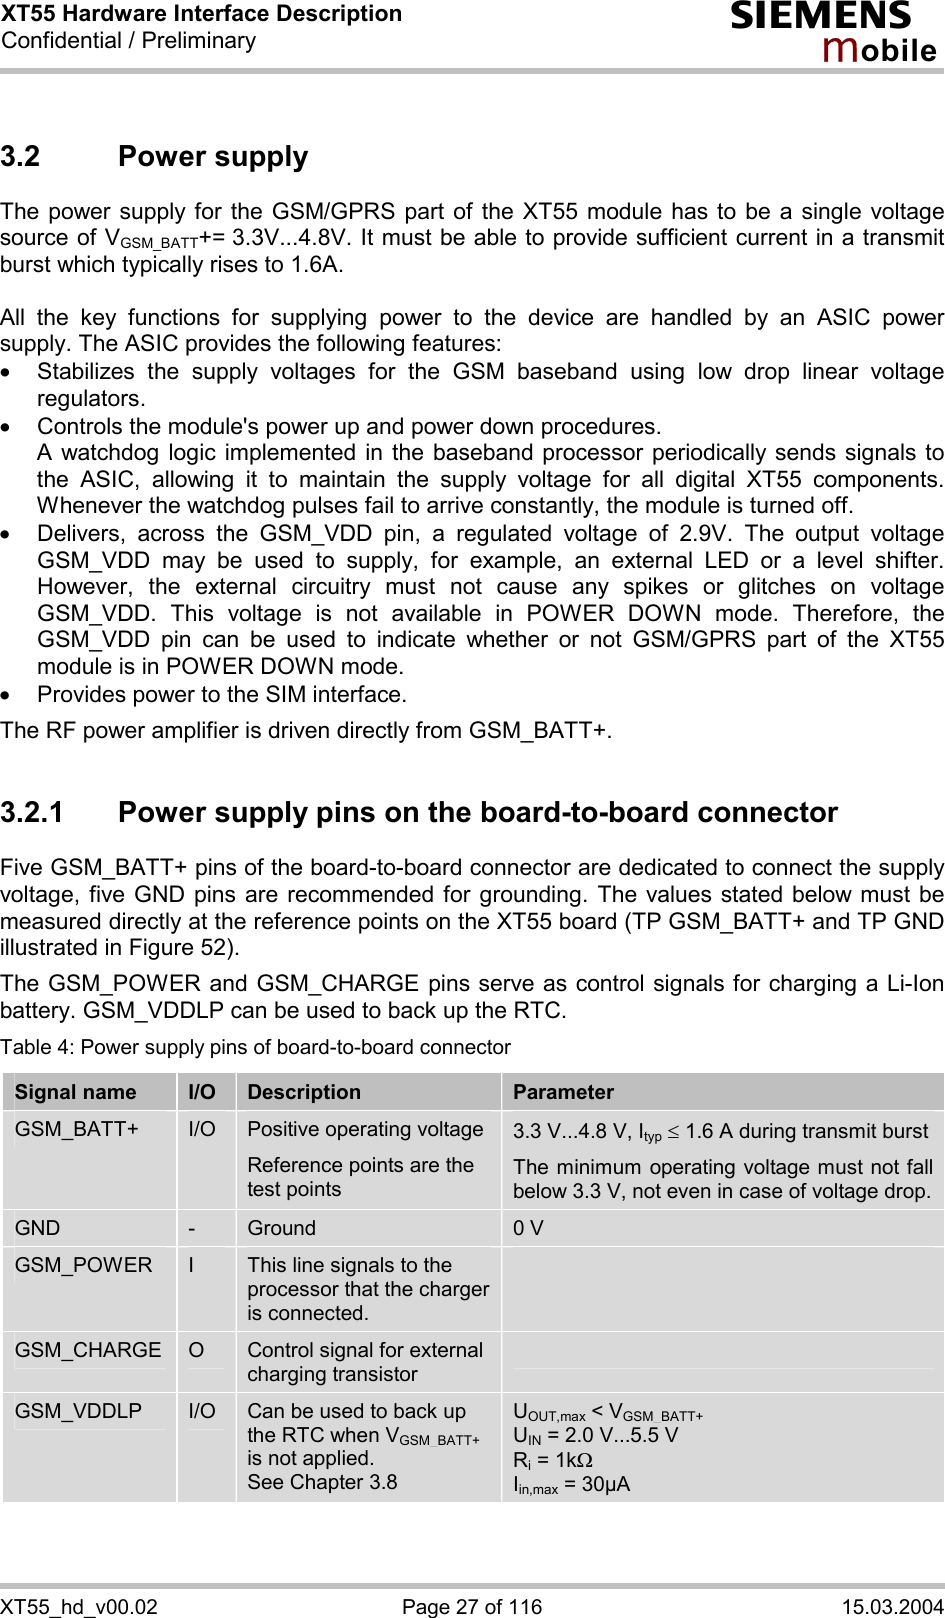 XT55 Hardware Interface Description Confidential / Preliminary s mo b i l e XT55_hd_v00.02  Page 27 of 116  15.03.2004 3.2 Power supply The power supply for the GSM/GPRS part of the XT55 module has to be a single voltage source of VGSM_BATT+= 3.3V...4.8V. It must be able to provide sufficient current in a transmit burst which typically rises to 1.6A.   All the key functions for supplying power to the device are handled by an ASIC power supply. The ASIC provides the following features: ·  Stabilizes the supply voltages for the GSM baseband using low drop linear voltage regulators.  ·  Controls the module&apos;s power up and power down procedures.  A watchdog logic implemented in the baseband processor periodically sends signals to the ASIC, allowing it to maintain the supply voltage for all digital XT55 components. Whenever the watchdog pulses fail to arrive constantly, the module is turned off.  ·  Delivers, across the GSM_VDD pin, a regulated voltage of 2.9V. The output voltage GSM_VDD may be used to supply, for example, an external LED or a level shifter. However, the external circuitry must not cause any spikes or glitches on voltage GSM_VDD. This voltage is not available in POWER DOWN mode. Therefore, the GSM_VDD pin can be used to indicate whether or not GSM/GPRS part of the XT55 module is in POWER DOWN mode. ·  Provides power to the SIM interface.  The RF power amplifier is driven directly from GSM_BATT+.  3.2.1  Power supply pins on the board-to-board connector Five GSM_BATT+ pins of the board-to-board connector are dedicated to connect the supply voltage, five GND pins are recommended for grounding. The values stated below must be measured directly at the reference points on the XT55 board (TP GSM_BATT+ and TP GND illustrated in Figure 52).  The GSM_POWER and GSM_CHARGE pins serve as control signals for charging a Li-Ion battery. GSM_VDDLP can be used to back up the RTC.  Table 4: Power supply pins of board-to-board connector Signal name  I/O  Description  Parameter GSM_BATT+  I/O  Positive operating voltage Reference points are the test points  3.3 V...4.8 V, Ityp £ 1.6 A during transmit burst The minimum operating voltage must not fall below 3.3 V, not even in case of voltage drop. GND  -  Ground  0 V GSM_POWER  I  This line signals to the processor that the charger is connected.  GSM_CHARGE  O  Control signal for external charging transistor  GSM_VDDLP  I/O  Can be used to back up the RTC when VGSM_BATT+ is not applied.  See Chapter 3.8 UOUT,max &lt; VGSM_BATT+ UIN = 2.0 V...5.5 V Ri = 1kW Iin,max = 30µA  